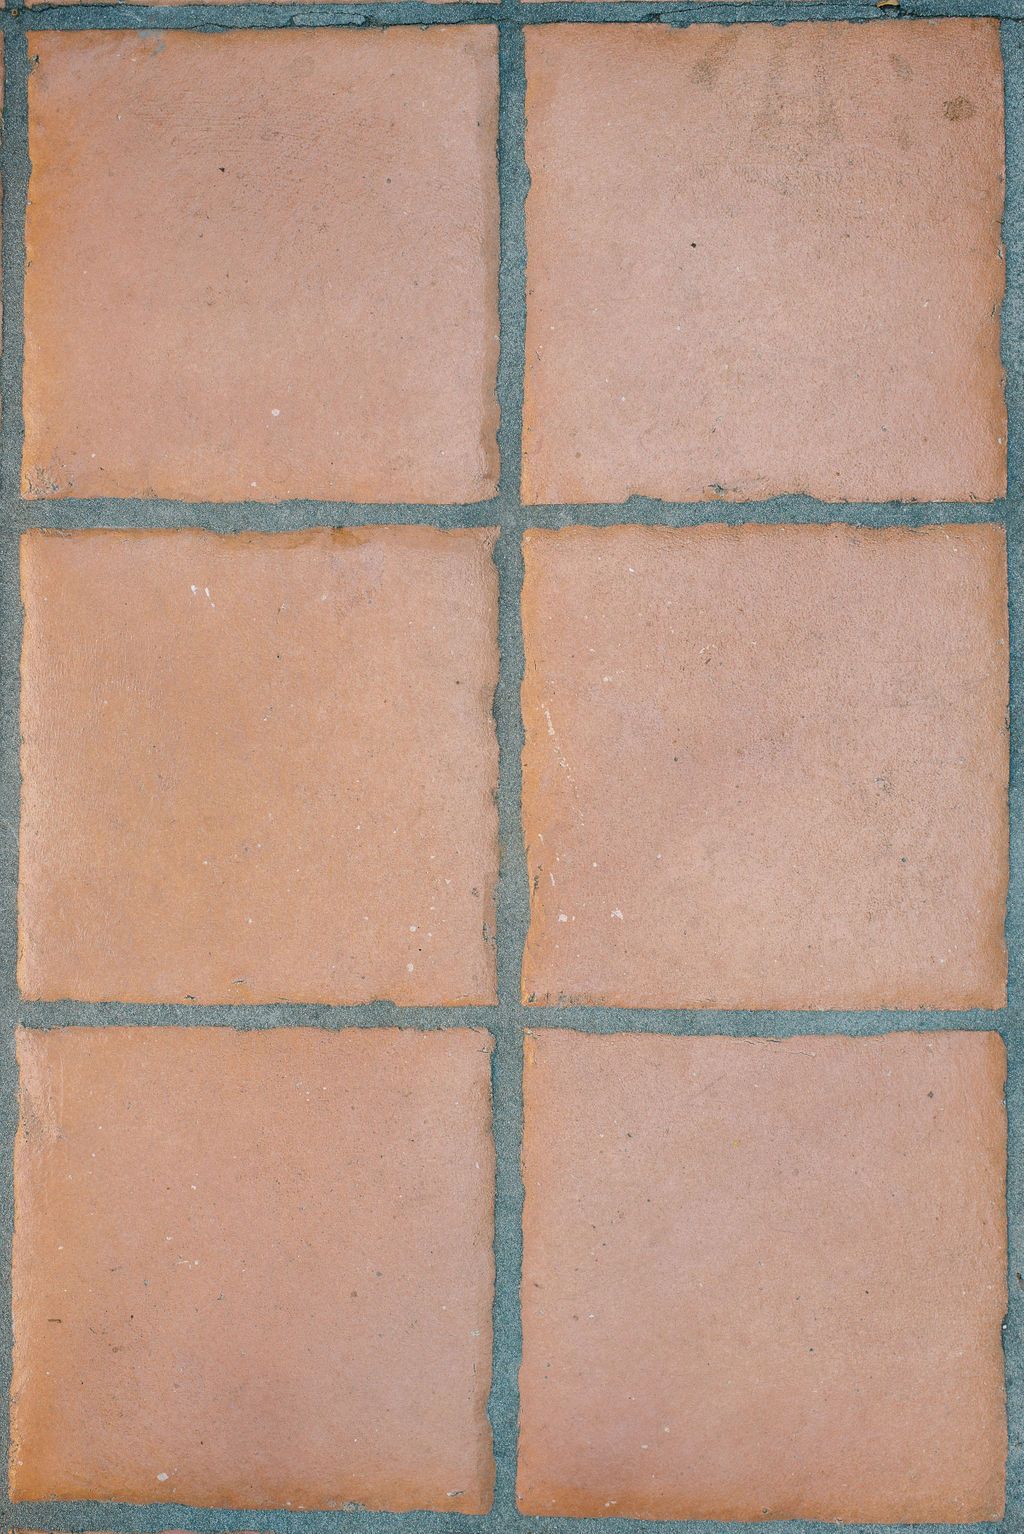 a close up of a brick floor with a blue border